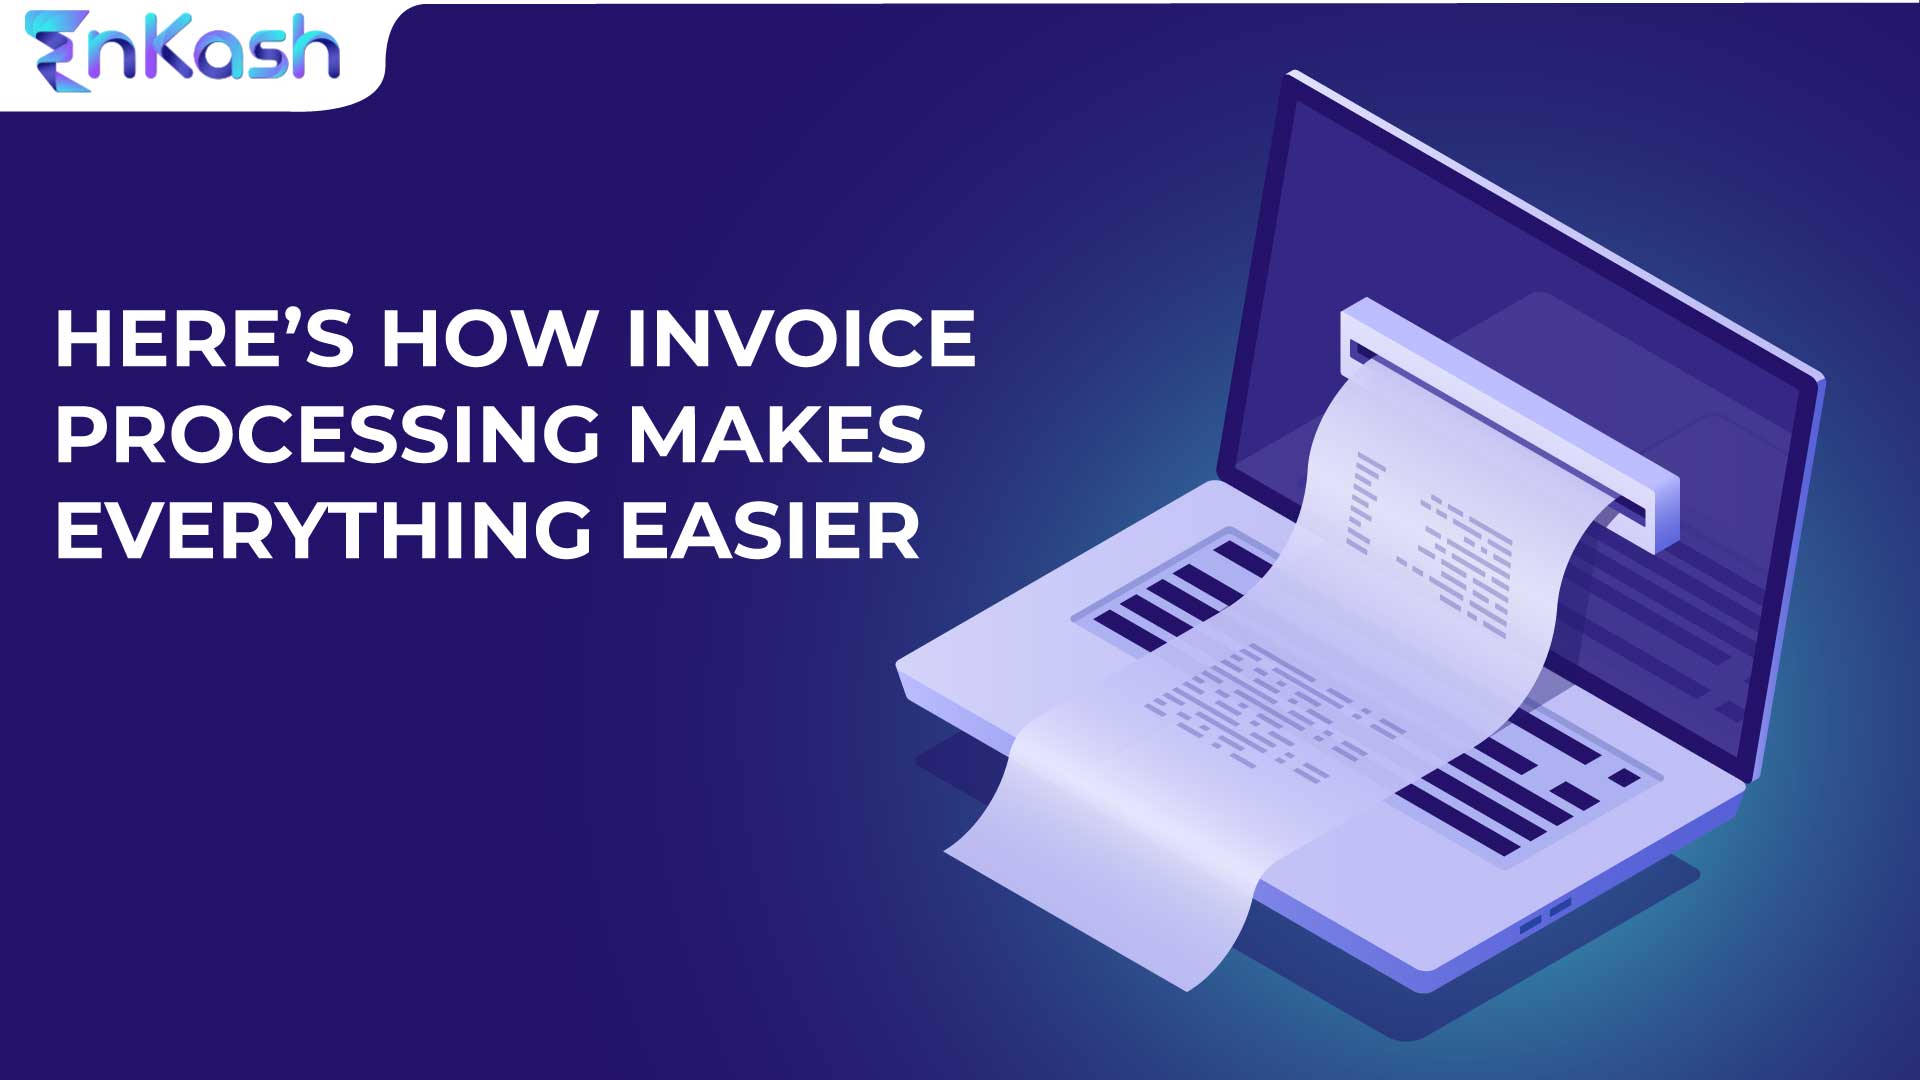 Here’s How Invoice Processing Makes Everything Easier